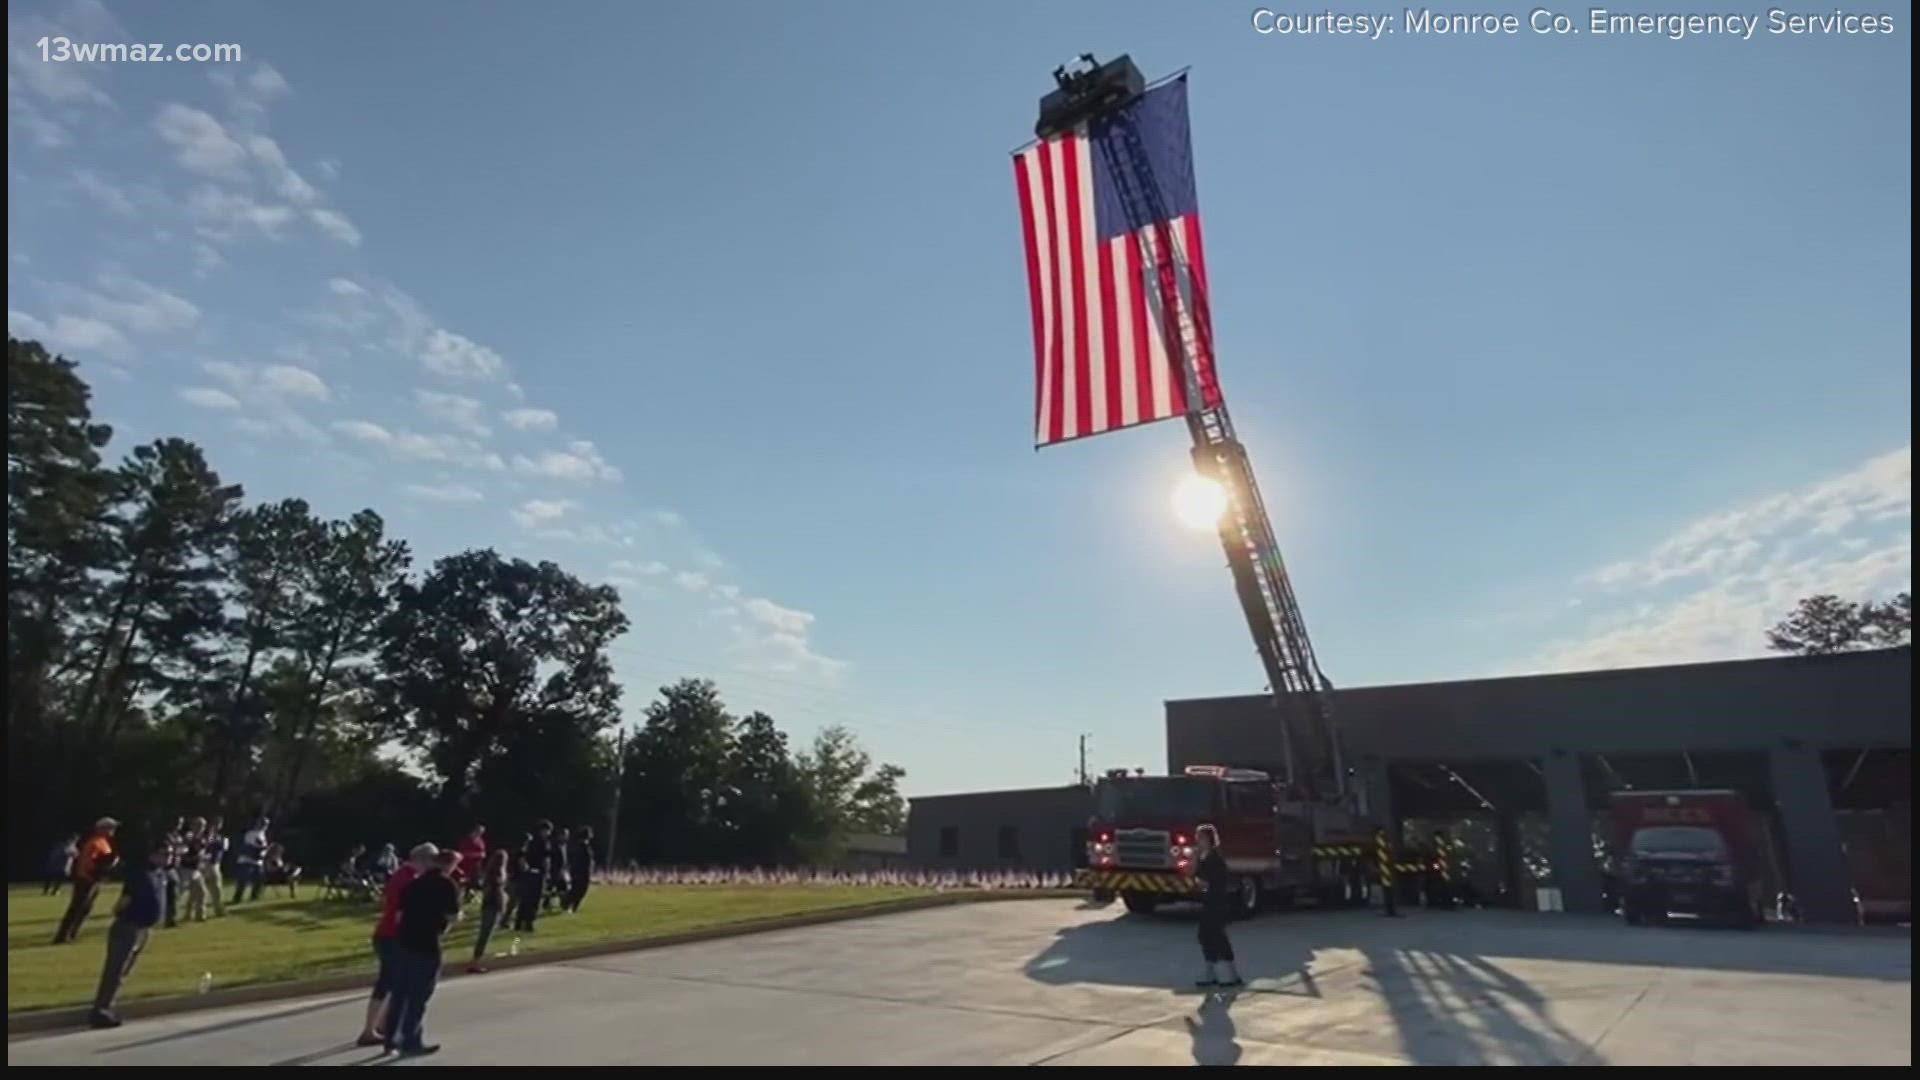 Counties and organizations across Central Georgia held services Saturday to commemorate the 20th anniversary of the 9/11 attacks on America.